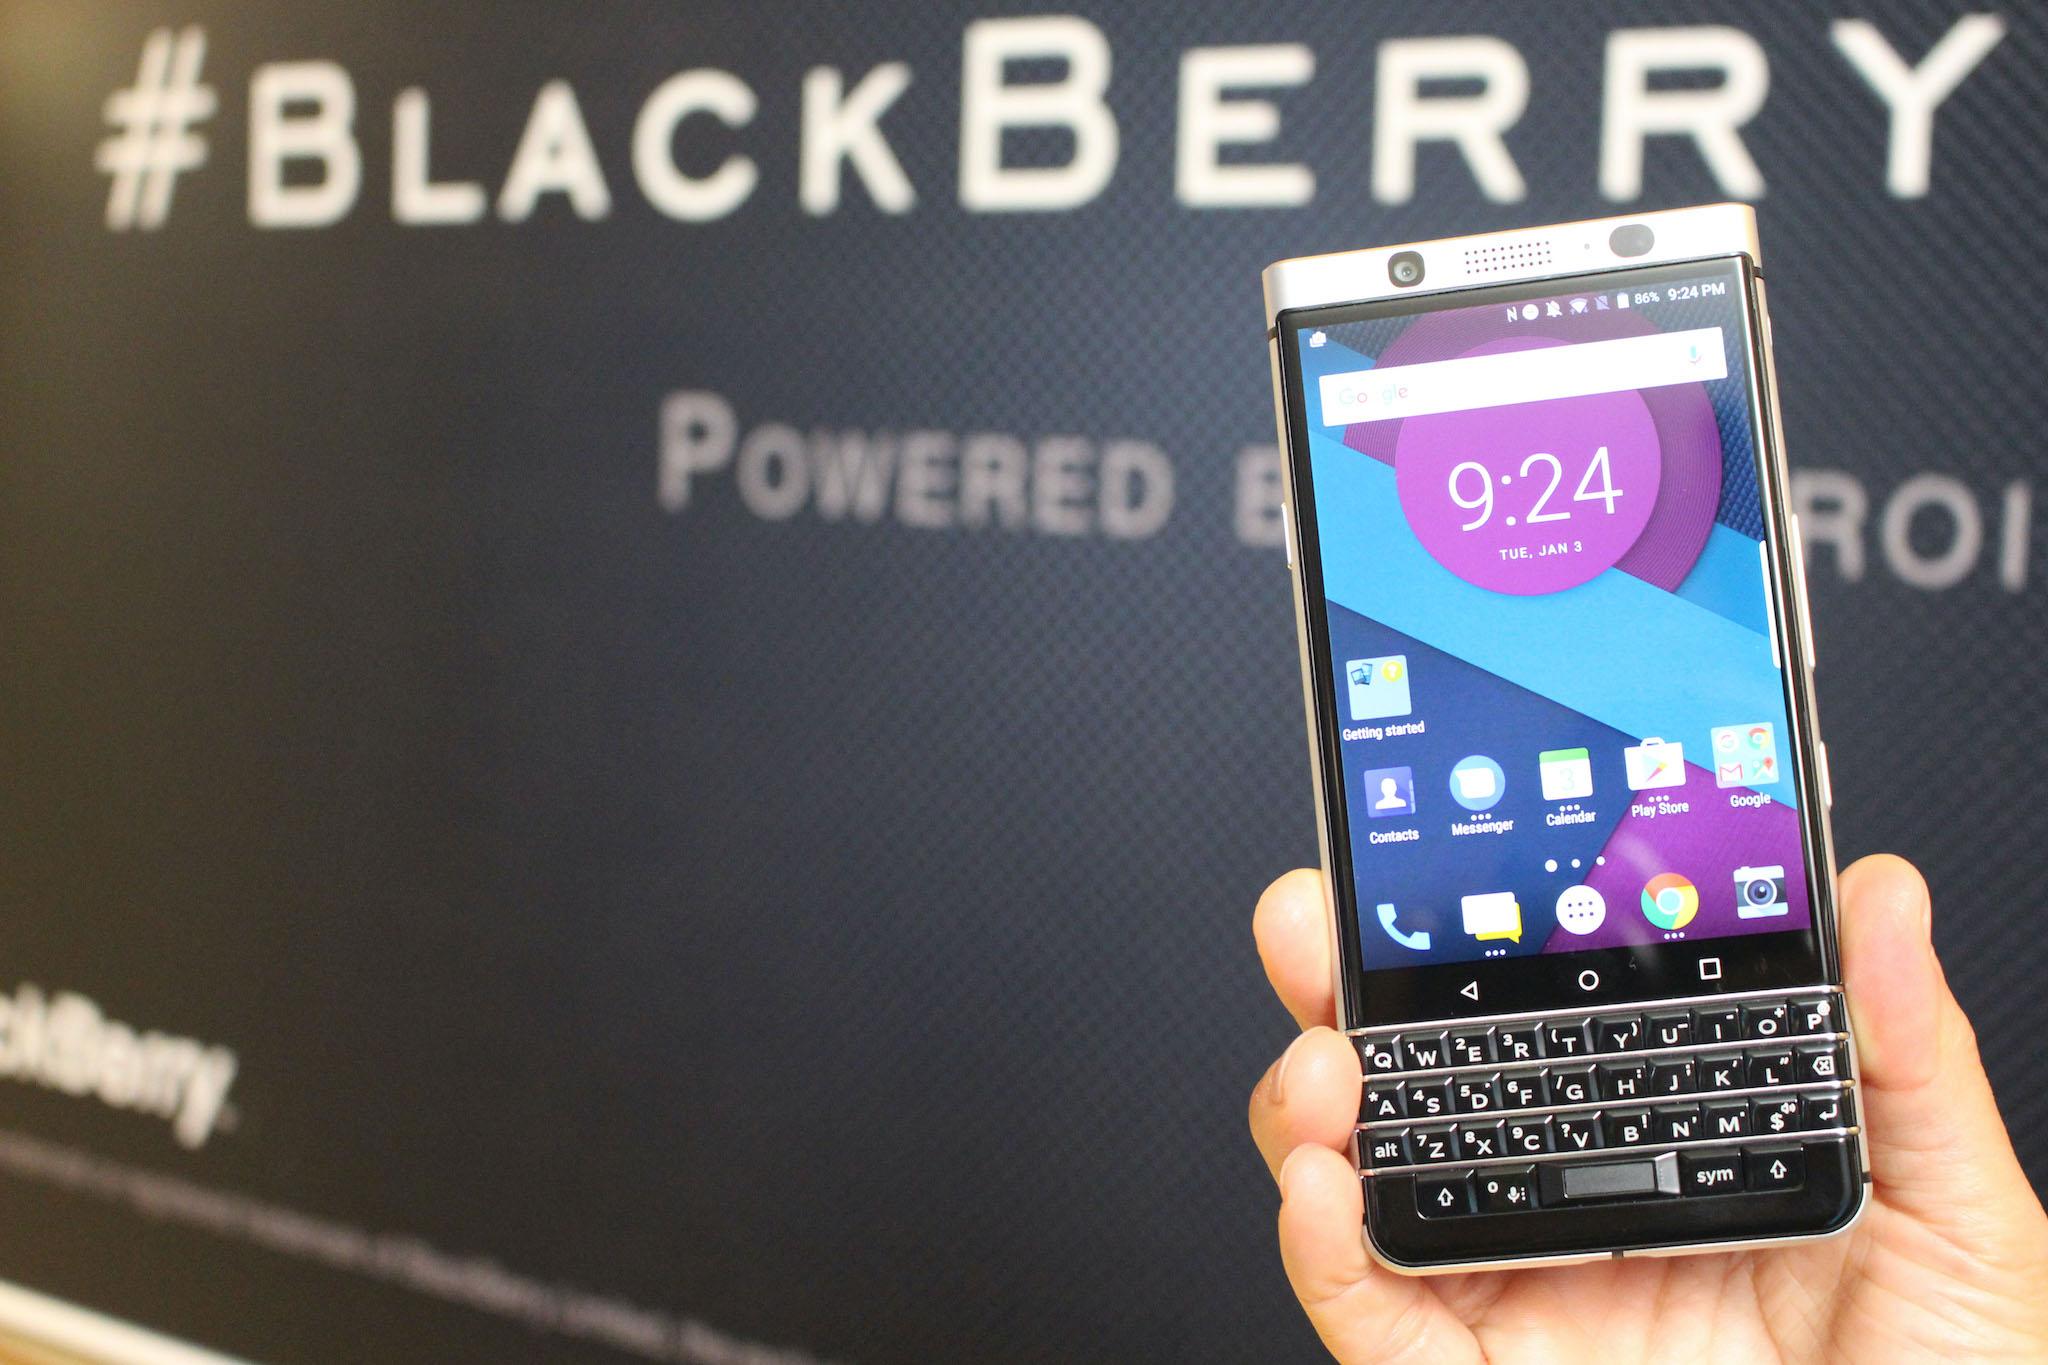 Most BlackBerry phones will stop working from today - Tech Advisor